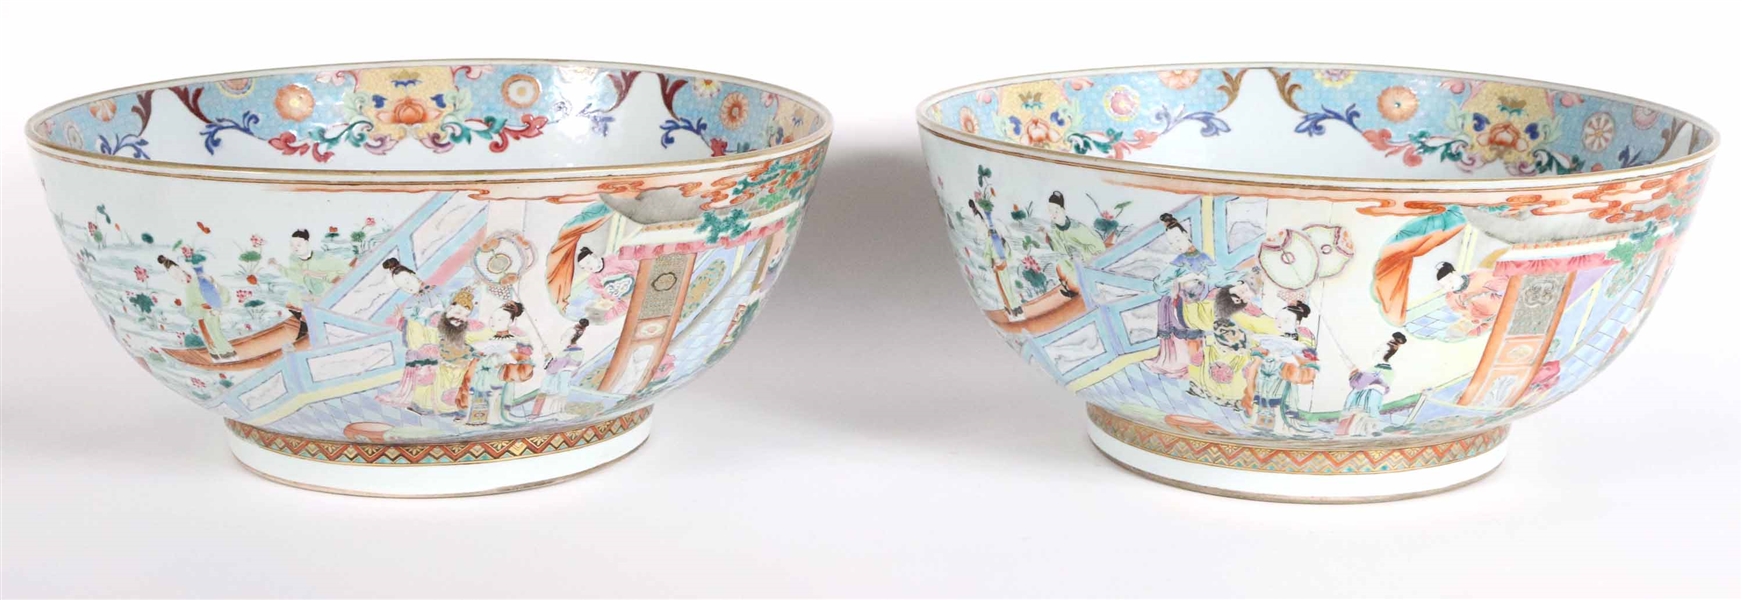 Pair of Chinese Export Porcelain Punch Bowls, 18th C.